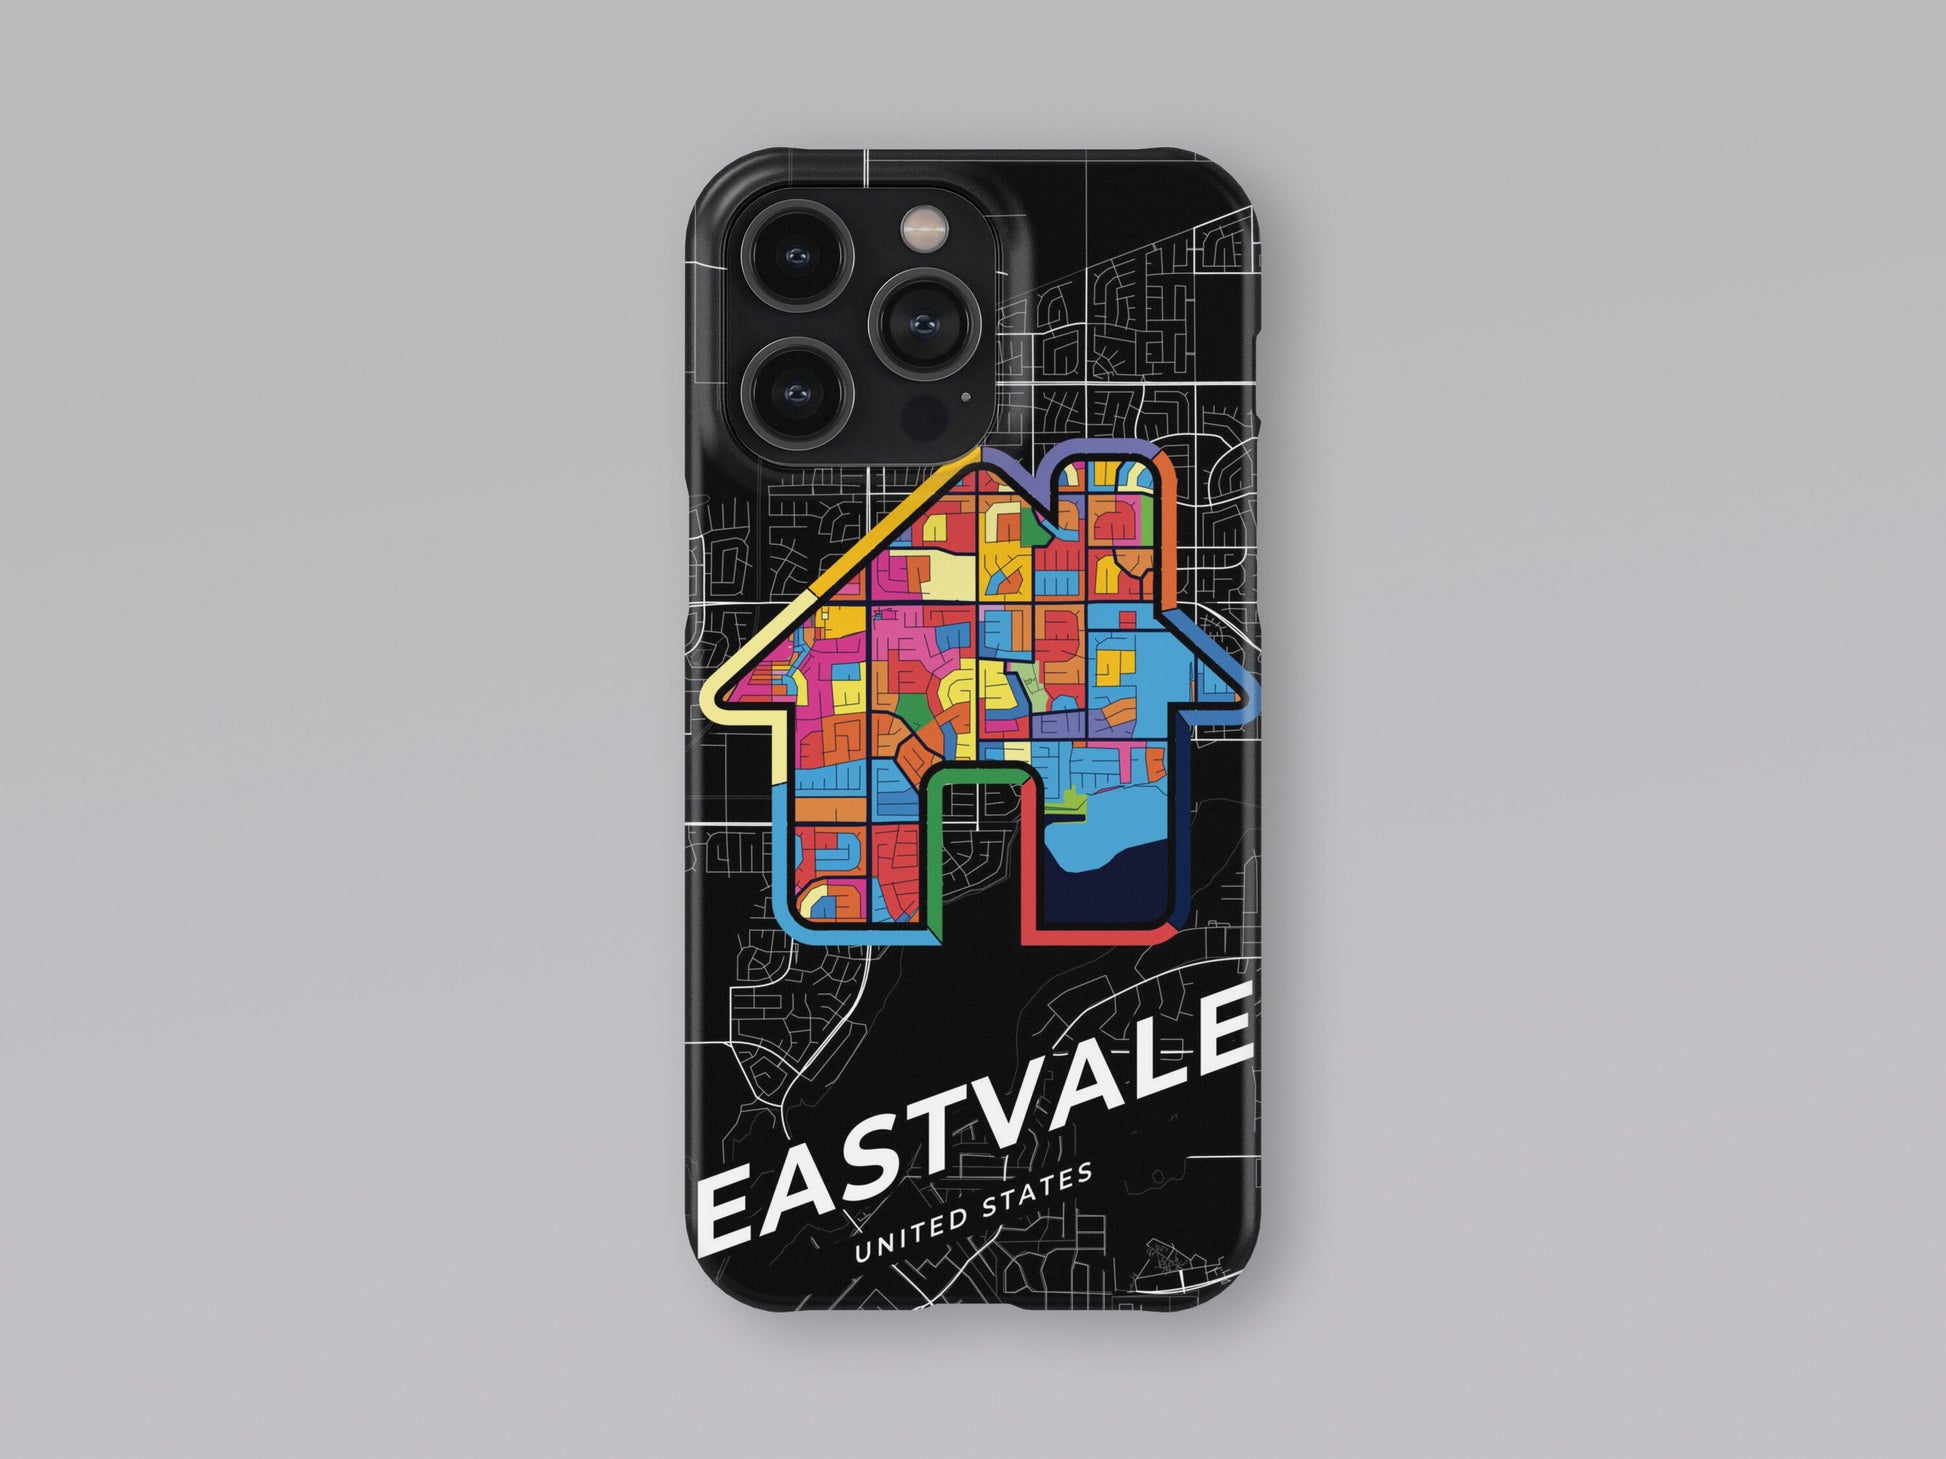 Eastvale California slim phone case with colorful icon. Birthday, wedding or housewarming gift. Couple match cases. 3